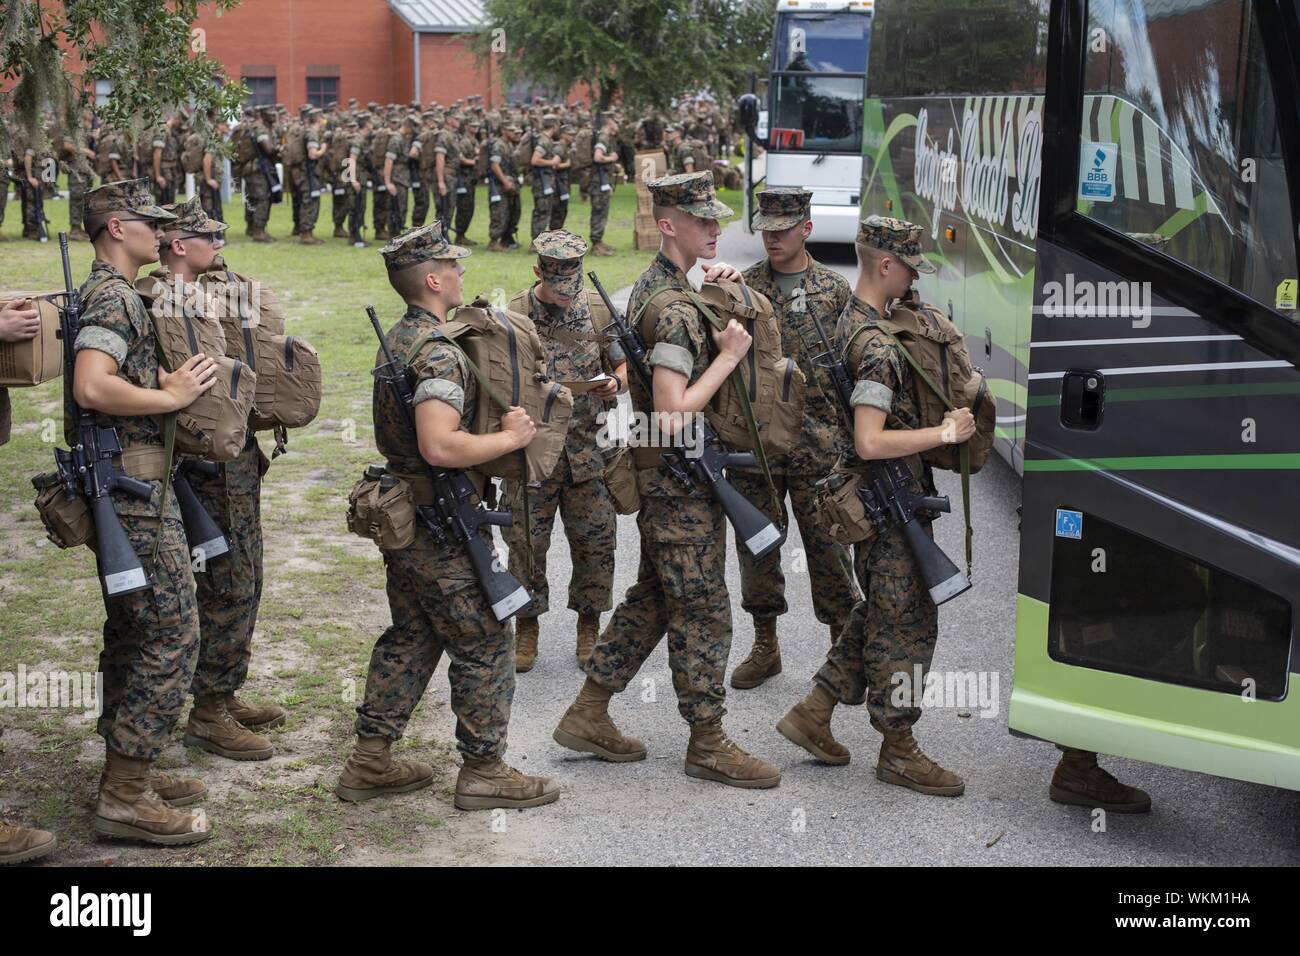 Marine Corps Recruit Depot Parris Island started the evacuation of recruits to Marine Corps Logistics Base Albany, Ga, September 3, 2019. Sept. 3 The decision to evacuate is due to Hurricane Dorian and the expected impacts of destructive weather in the region. () Stock Photo